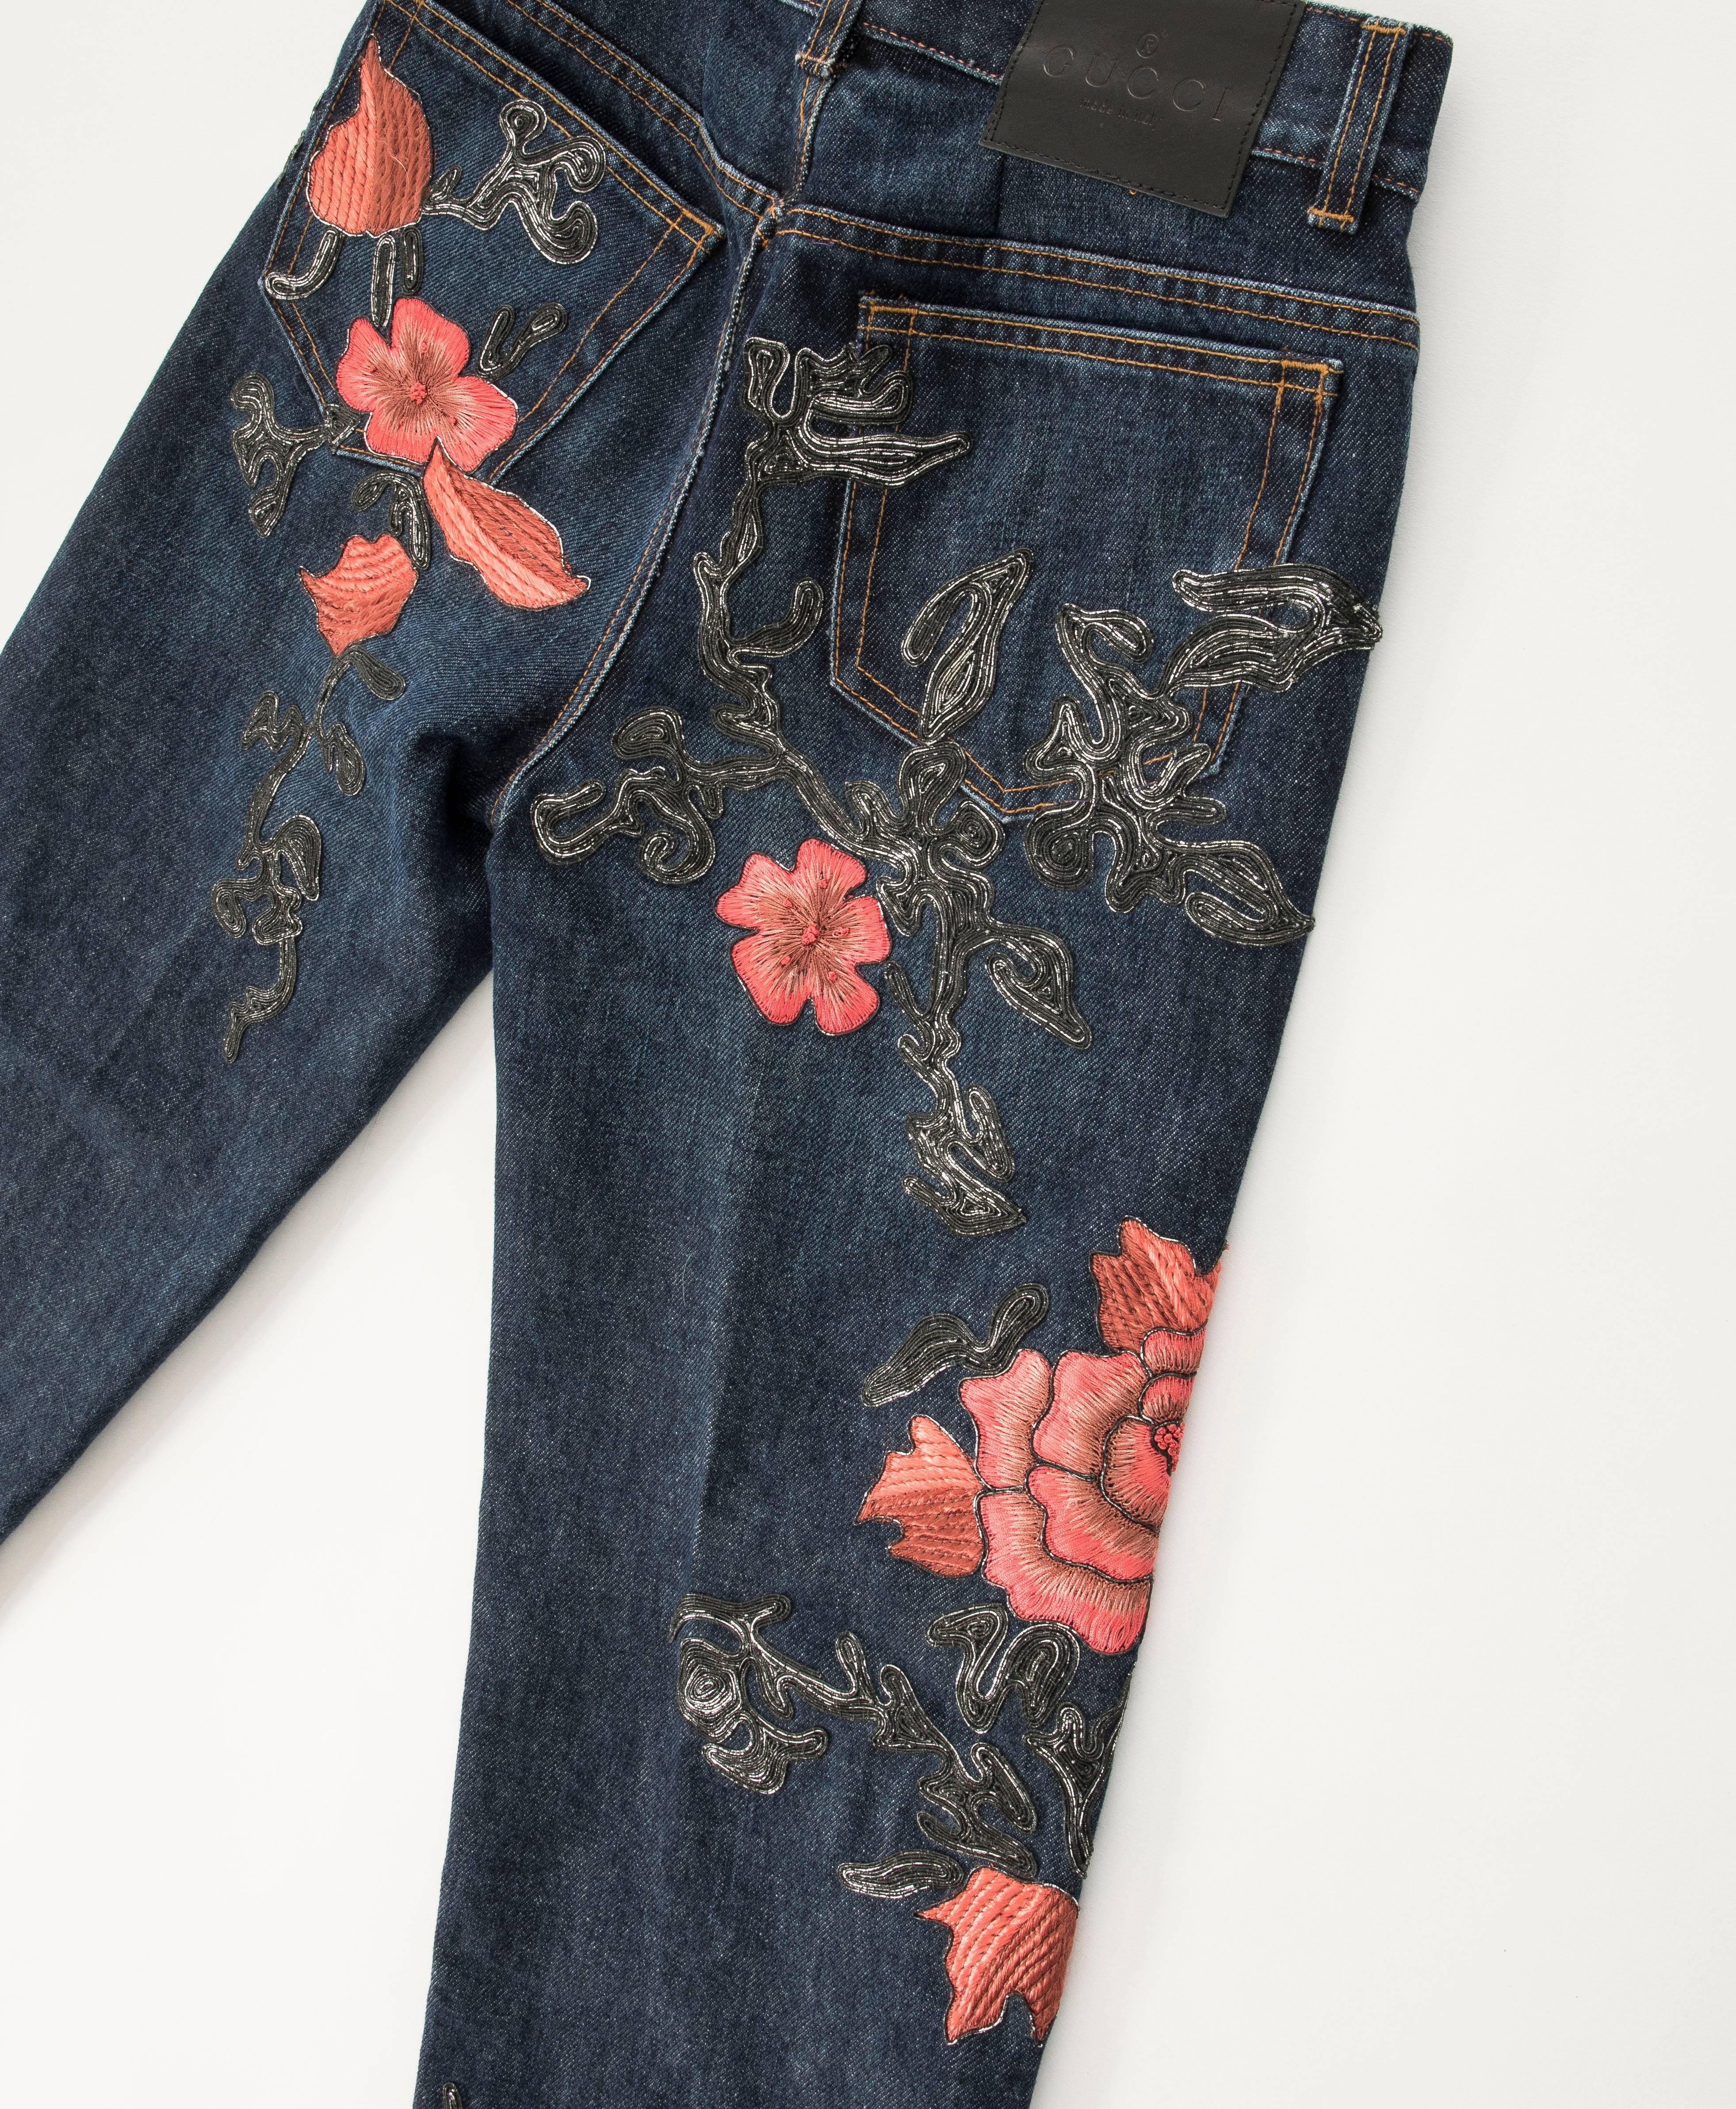 Tom Ford for Gucci Runway Men's Floral Embroidered Denim Jeans, Fall, 1999 For Sale 1